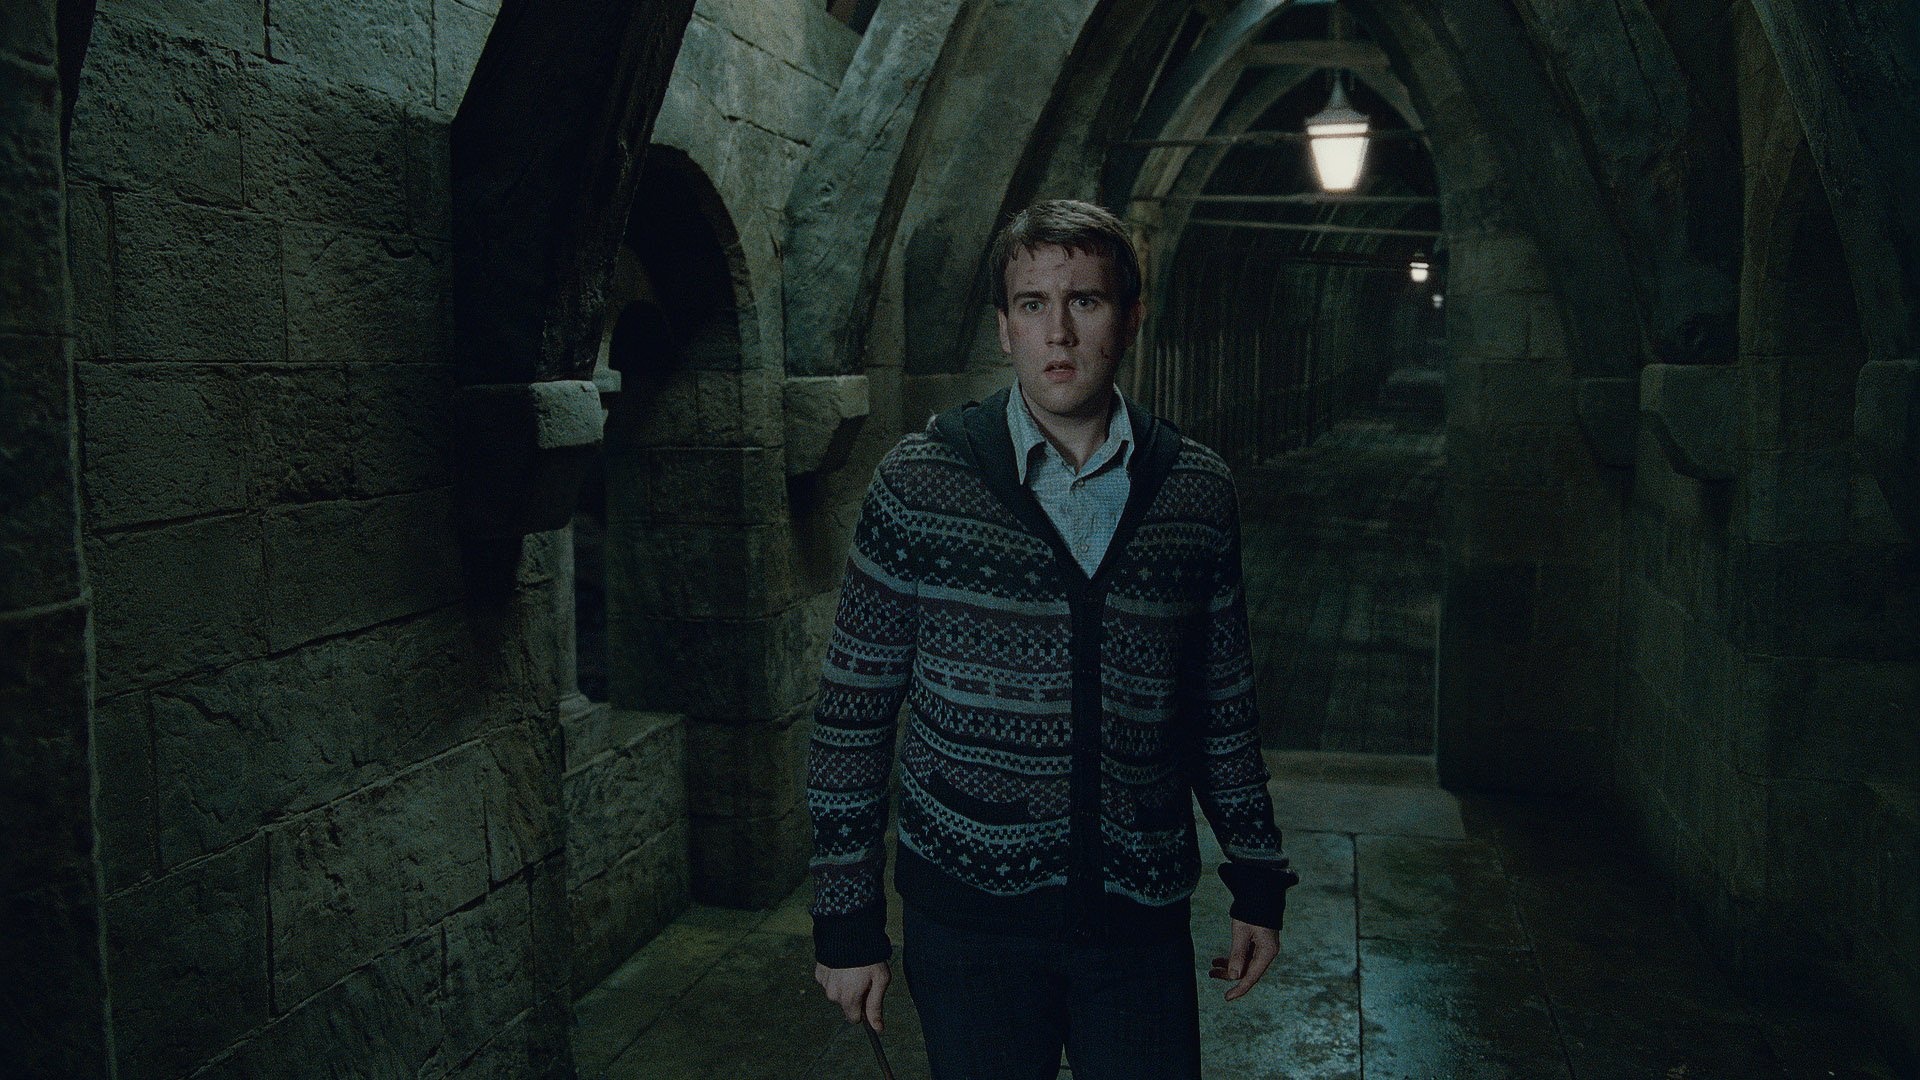 Harry Potter and the Deathly Hallows Part 2, HD wallpaper, Magical showdown, Neville Longbottom, 1920x1080 Full HD Desktop